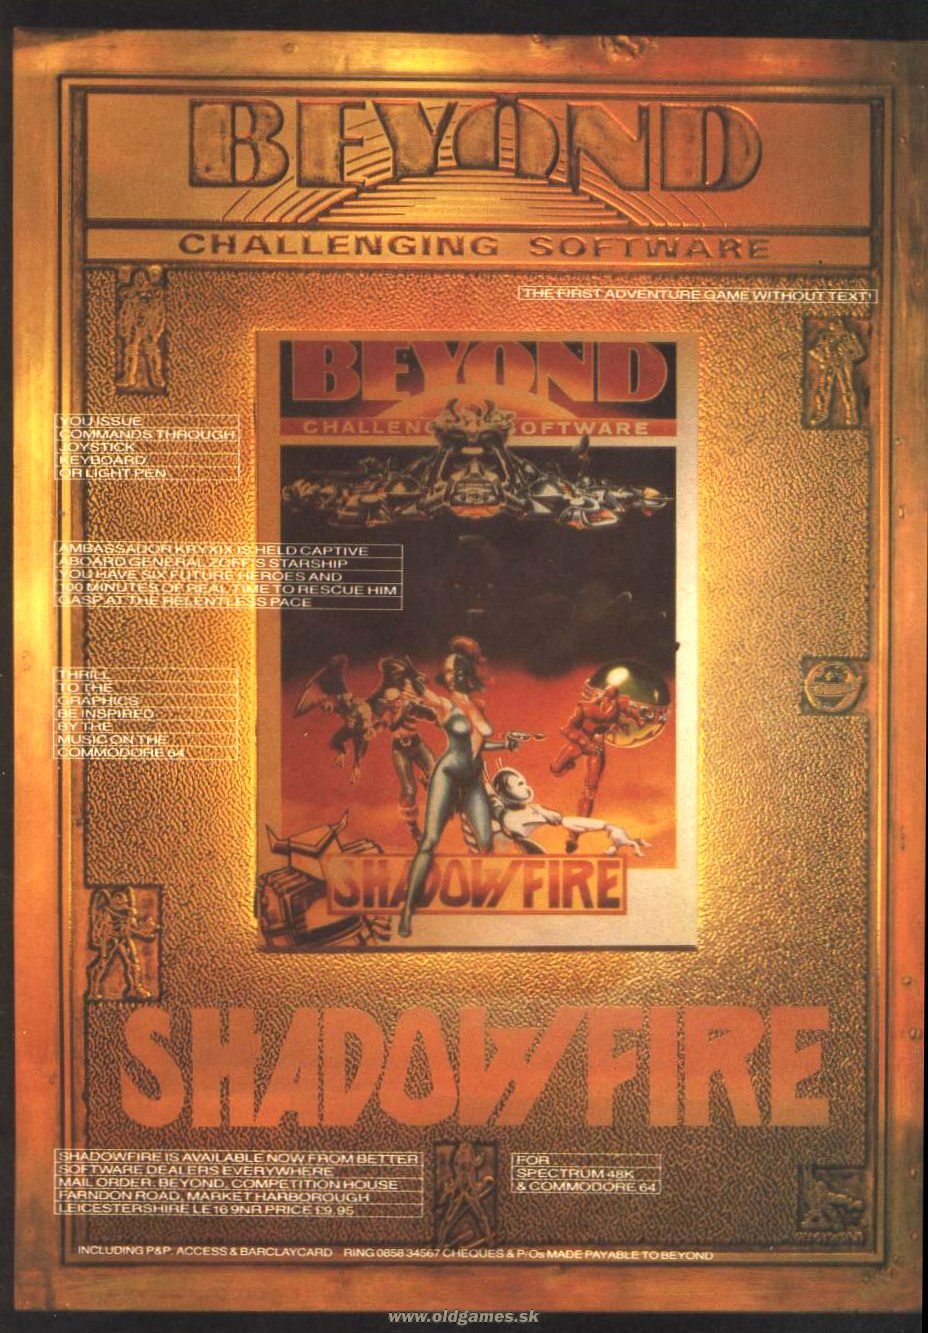 advert: Shadowfire (Beyond - Challenging Software)